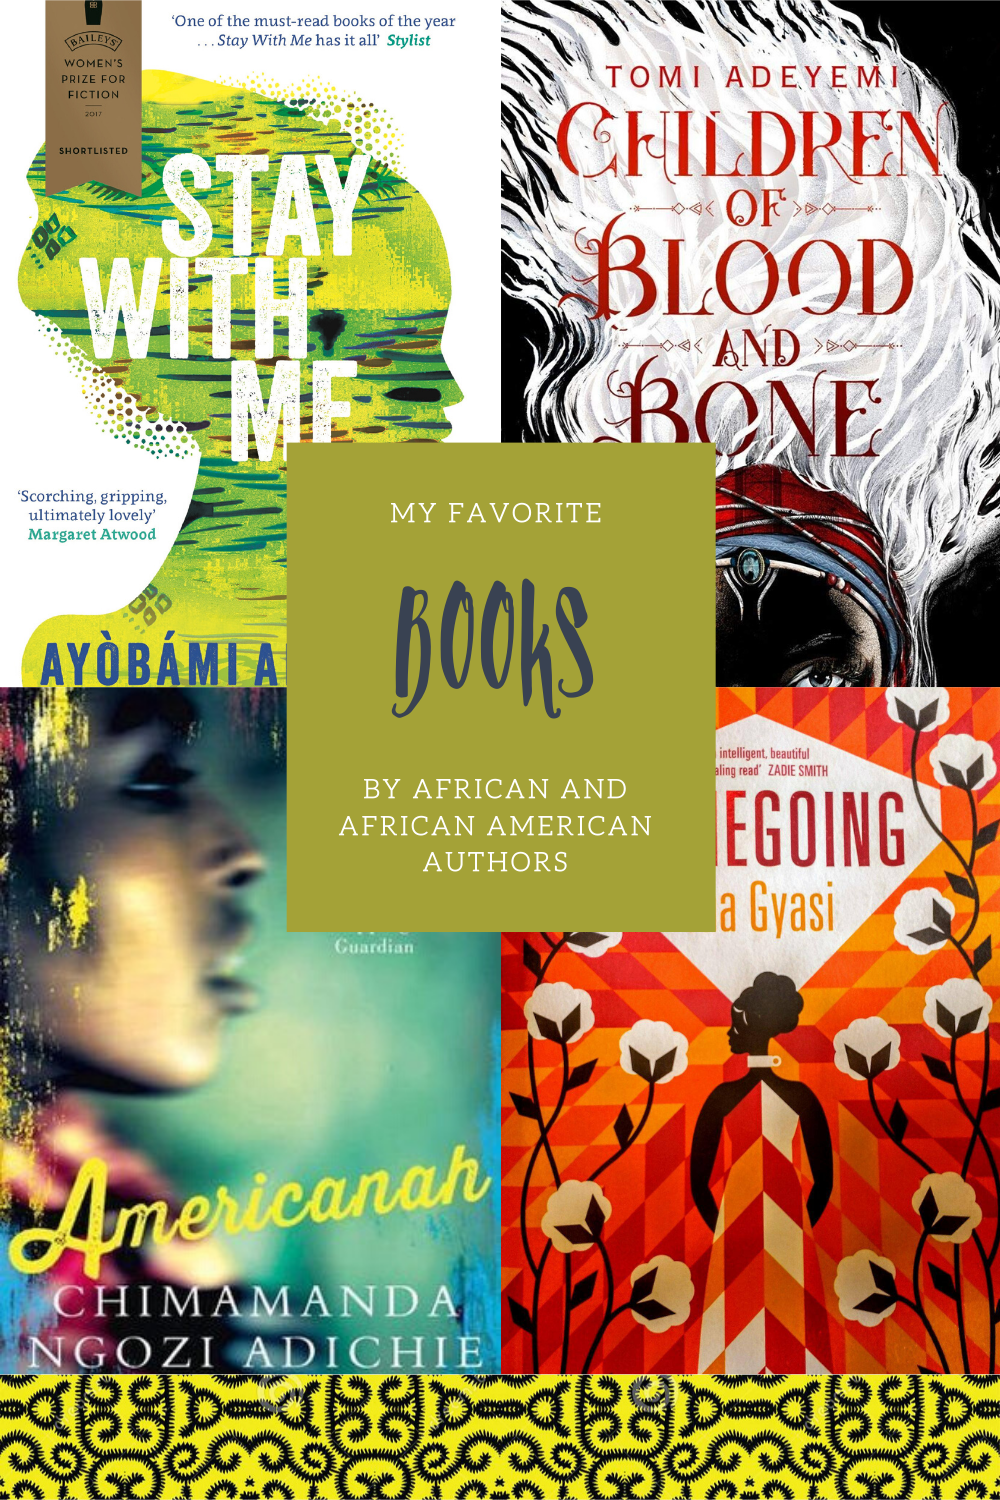 My favorite Books by African & African-American Authors